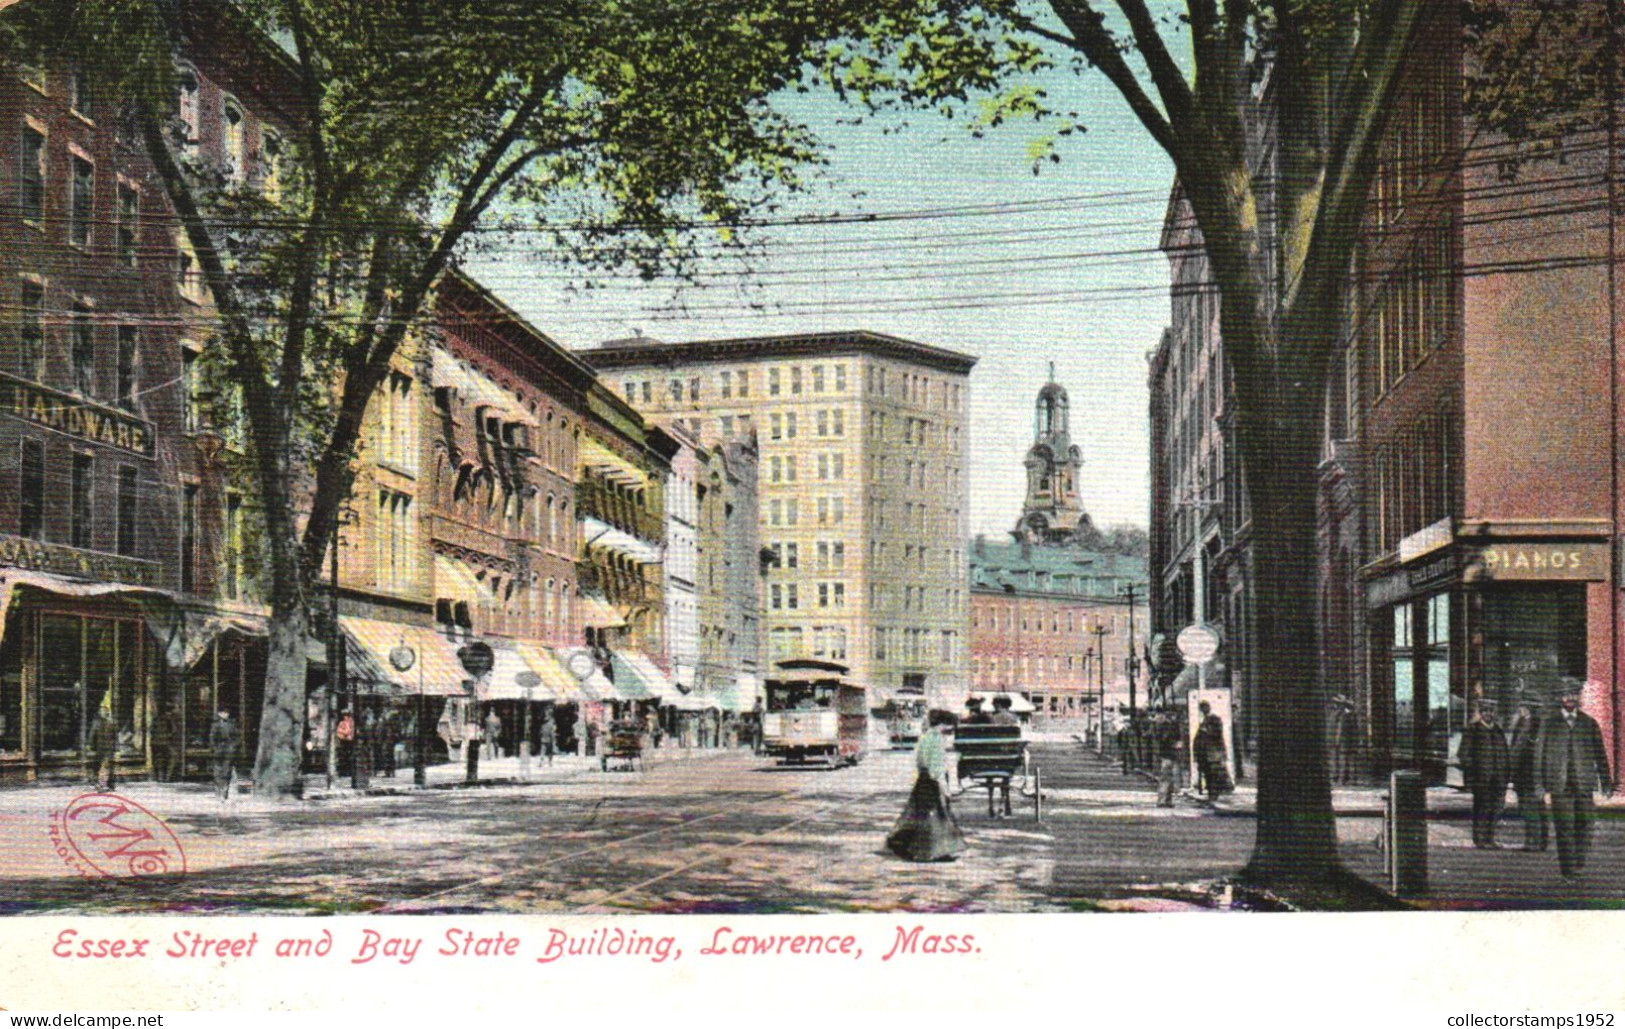 VINTAGE POSTCARD, UNITED STATES, MASSACHUSETTS, LAWRENCE, ESSEX STREET AND BAY STATE BUILDING - Lawrence